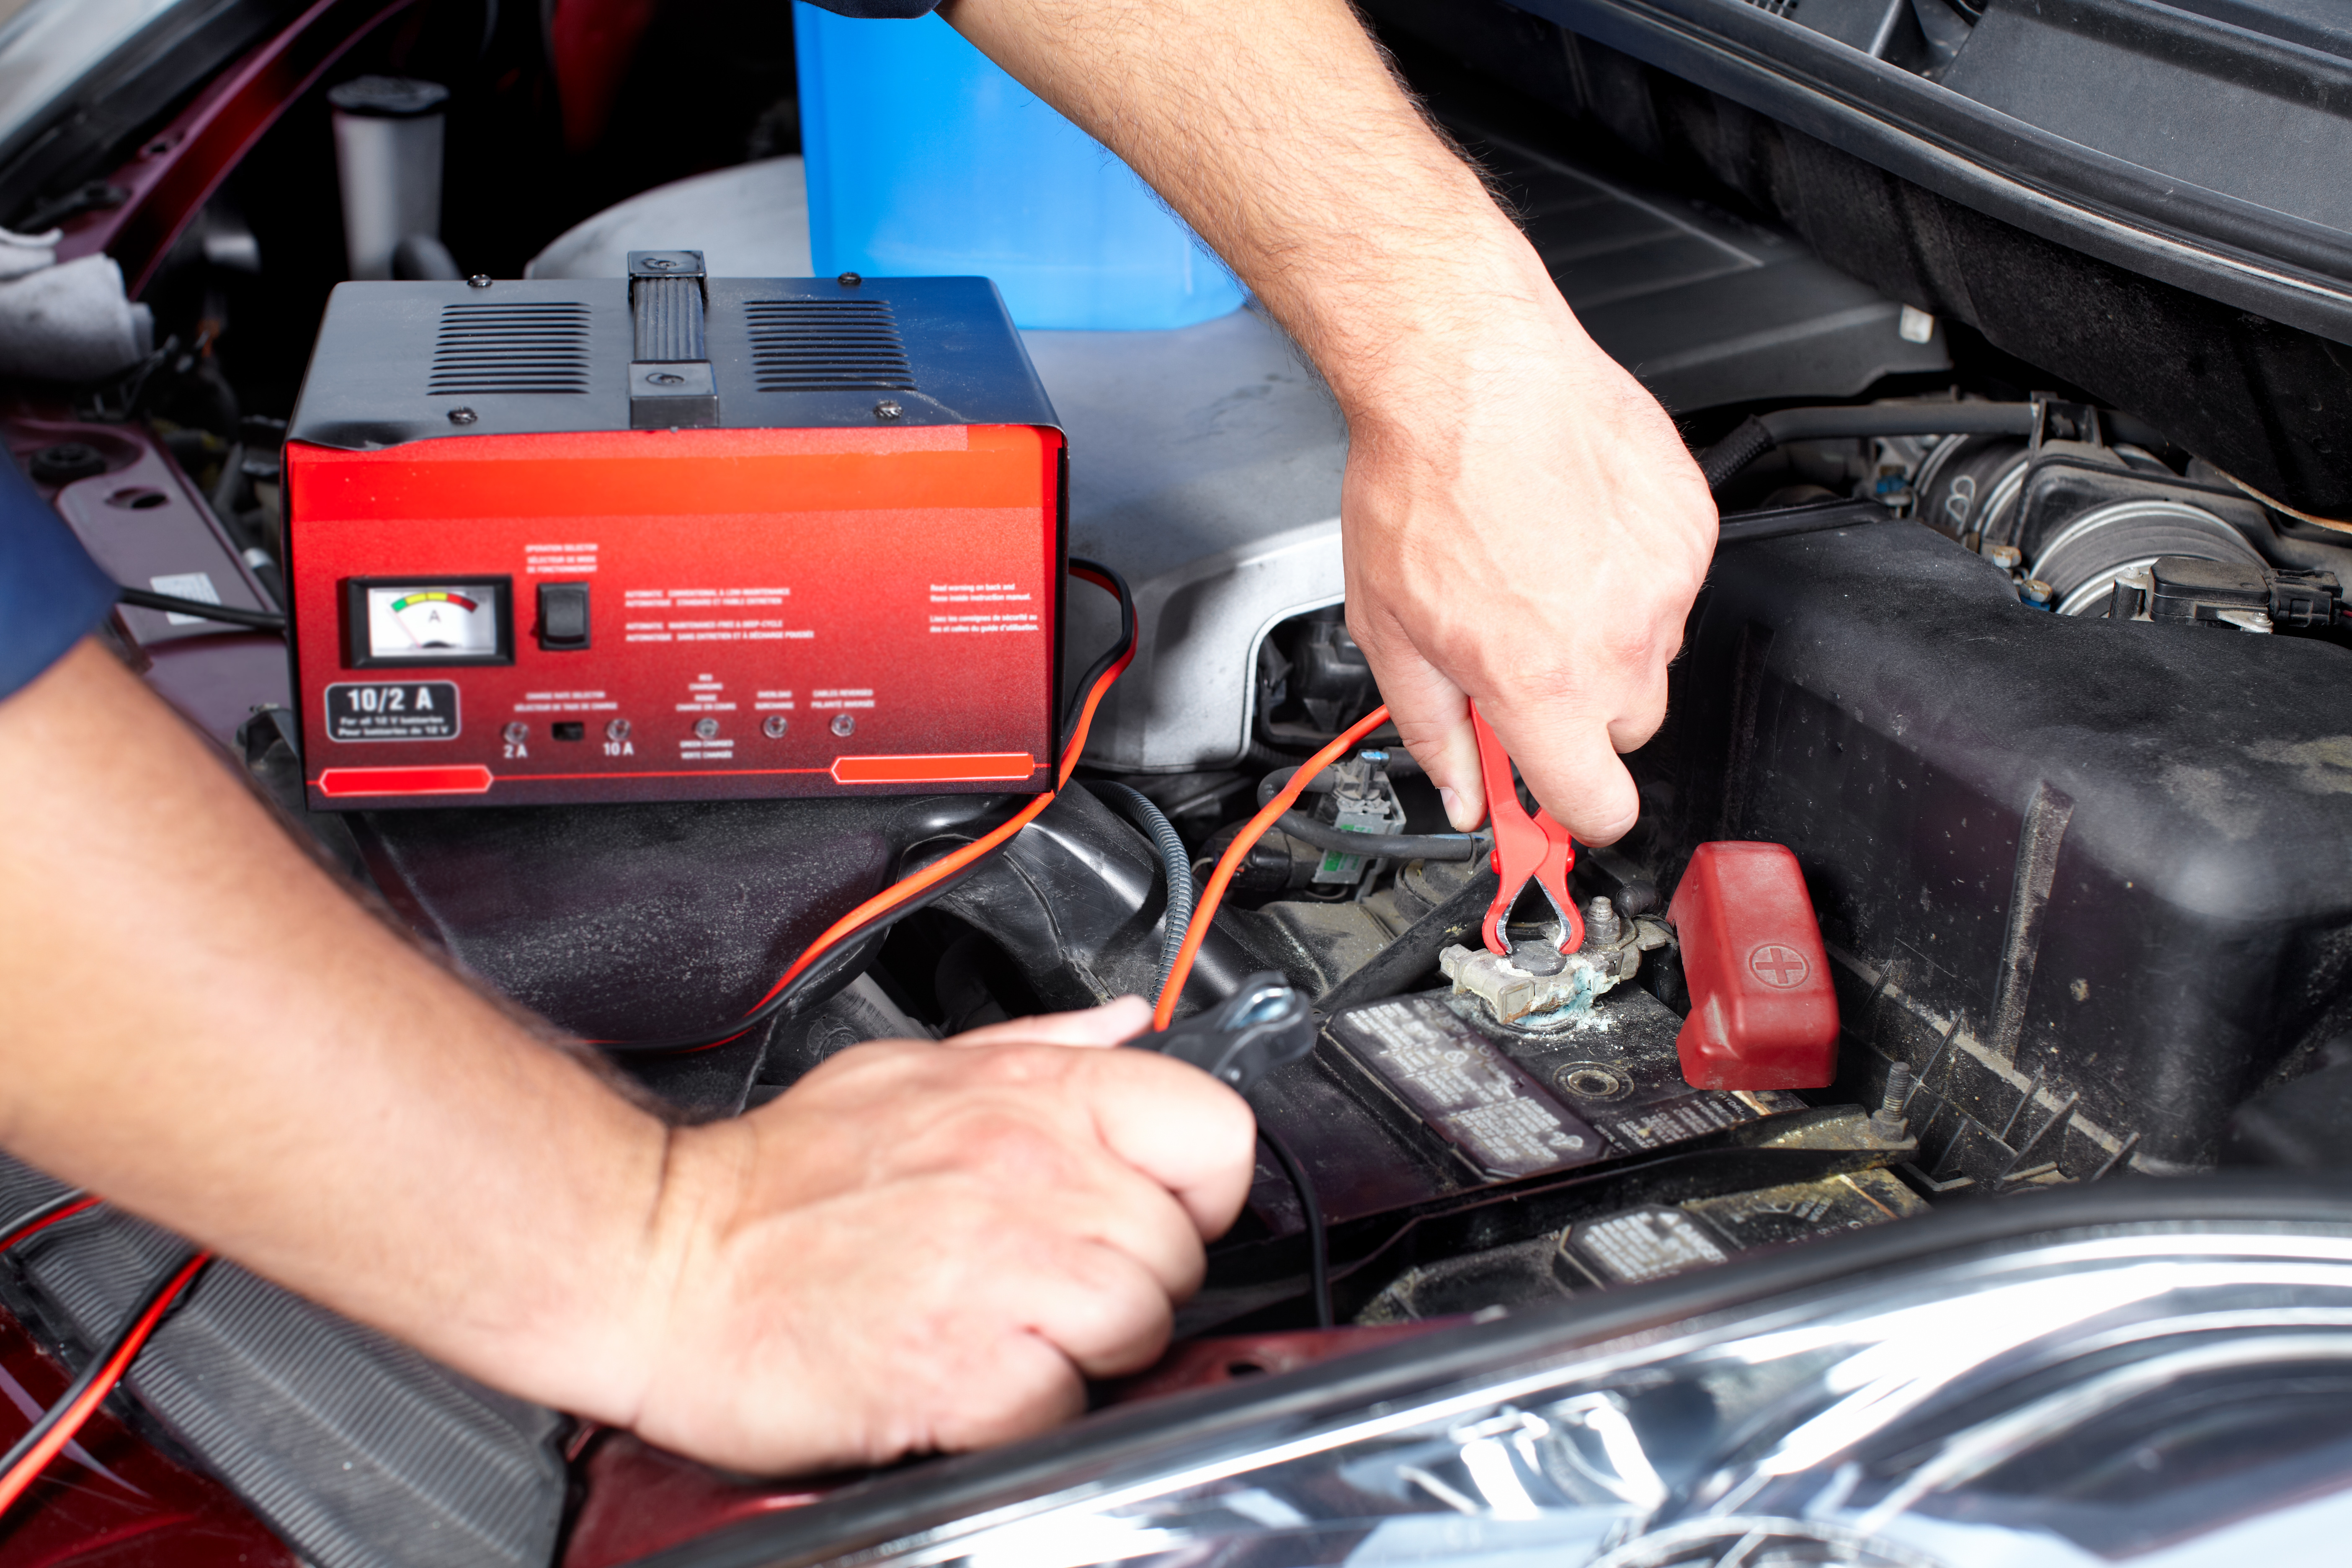 Does Your Car Battery Need to be Charged or Replaced? 